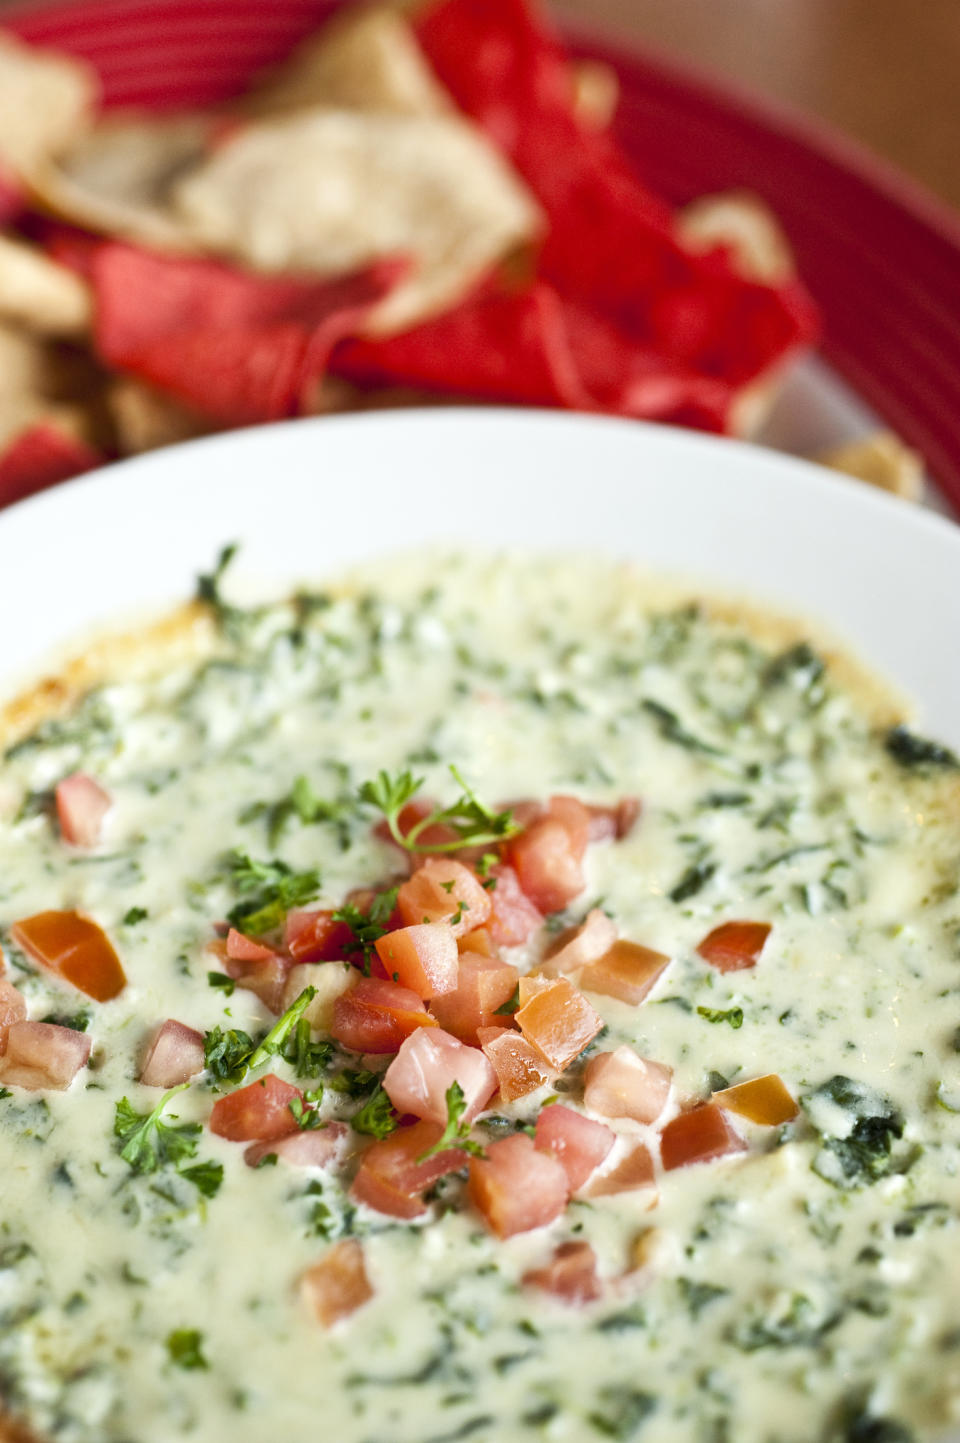 Spinach dip in a white bowl topped with diced tomatoes, served with tortilla chips